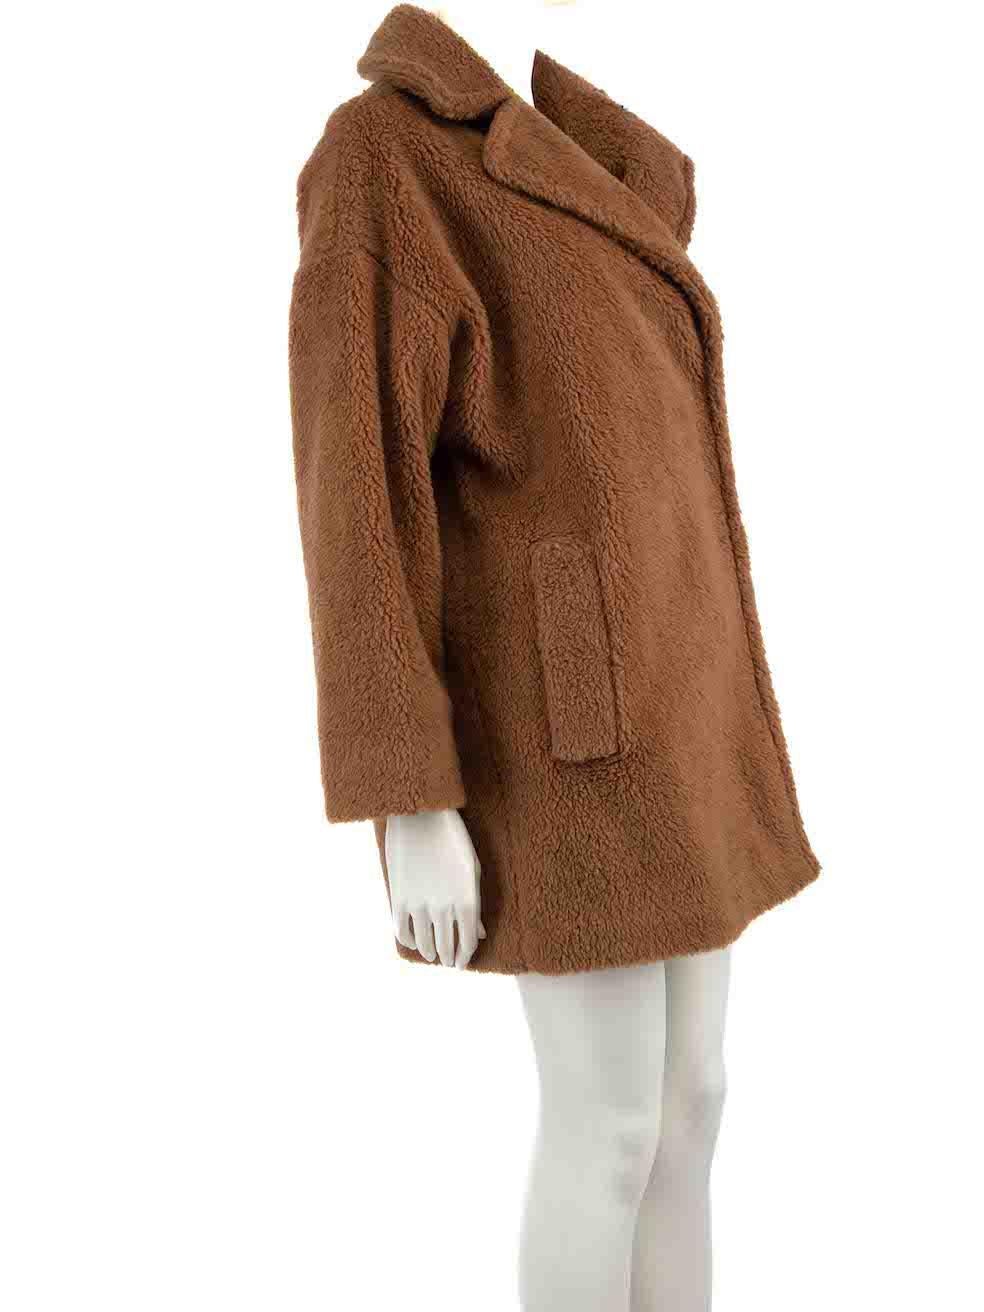 CONDITION is Very good. Hardly any visible wear to coat is evident on this used Weekend Max Mara designer resale item.
 
 Details
 Brown
 Wool
 Teddy bear coat
 Snap button fastening
 2x Side pockets
 
 
 Made in Albania
 
 Composition
 54% Wool,